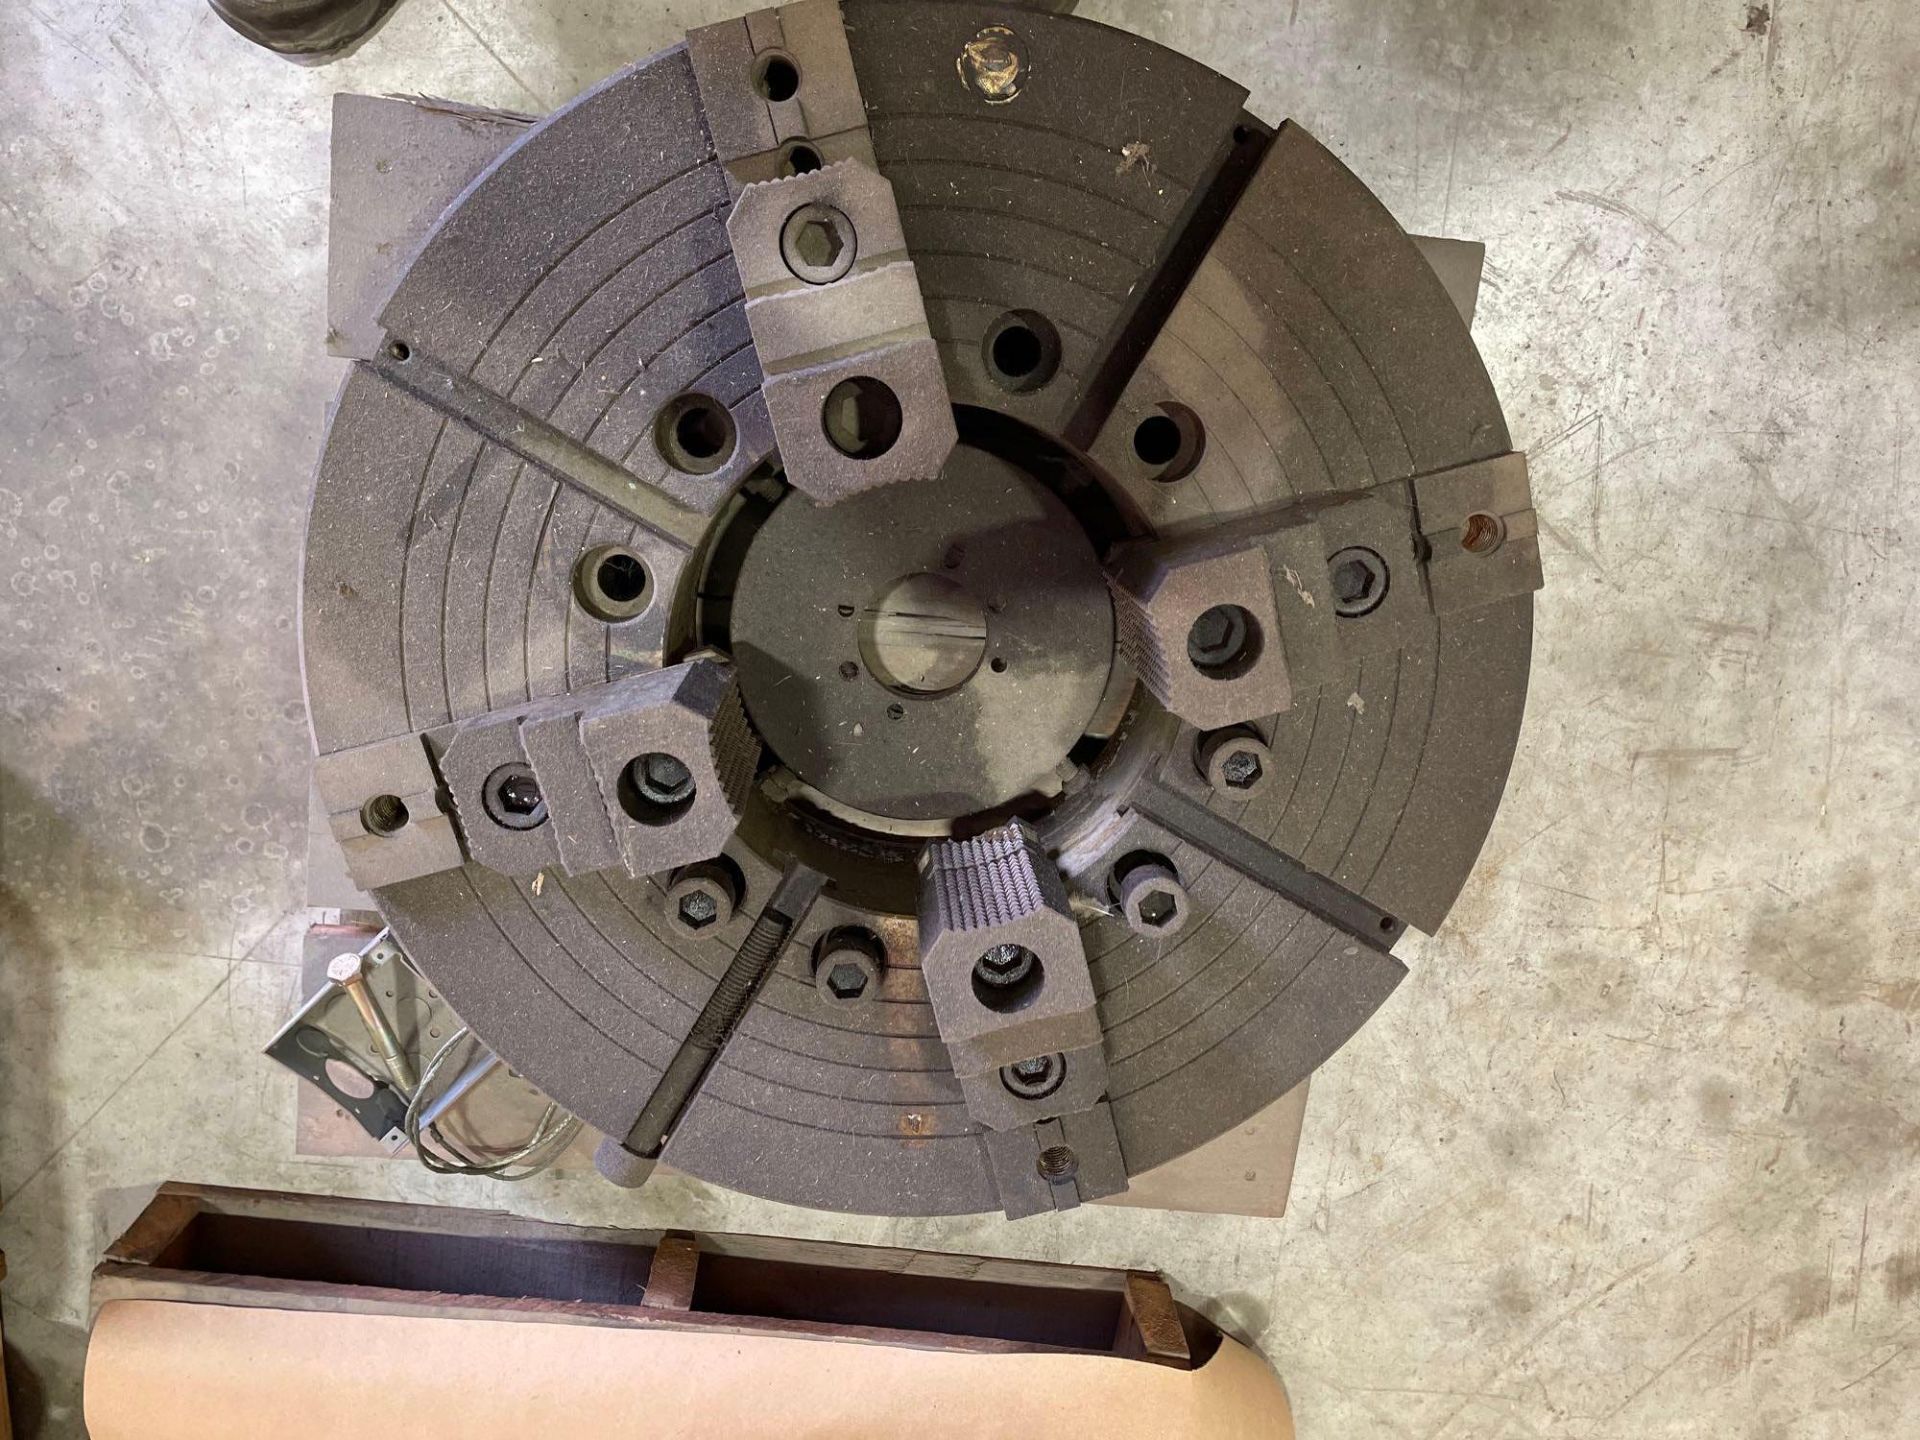 24” 4-Jaw Bison Chuck with 10-1/2” Thru-Hole - Image 2 of 4